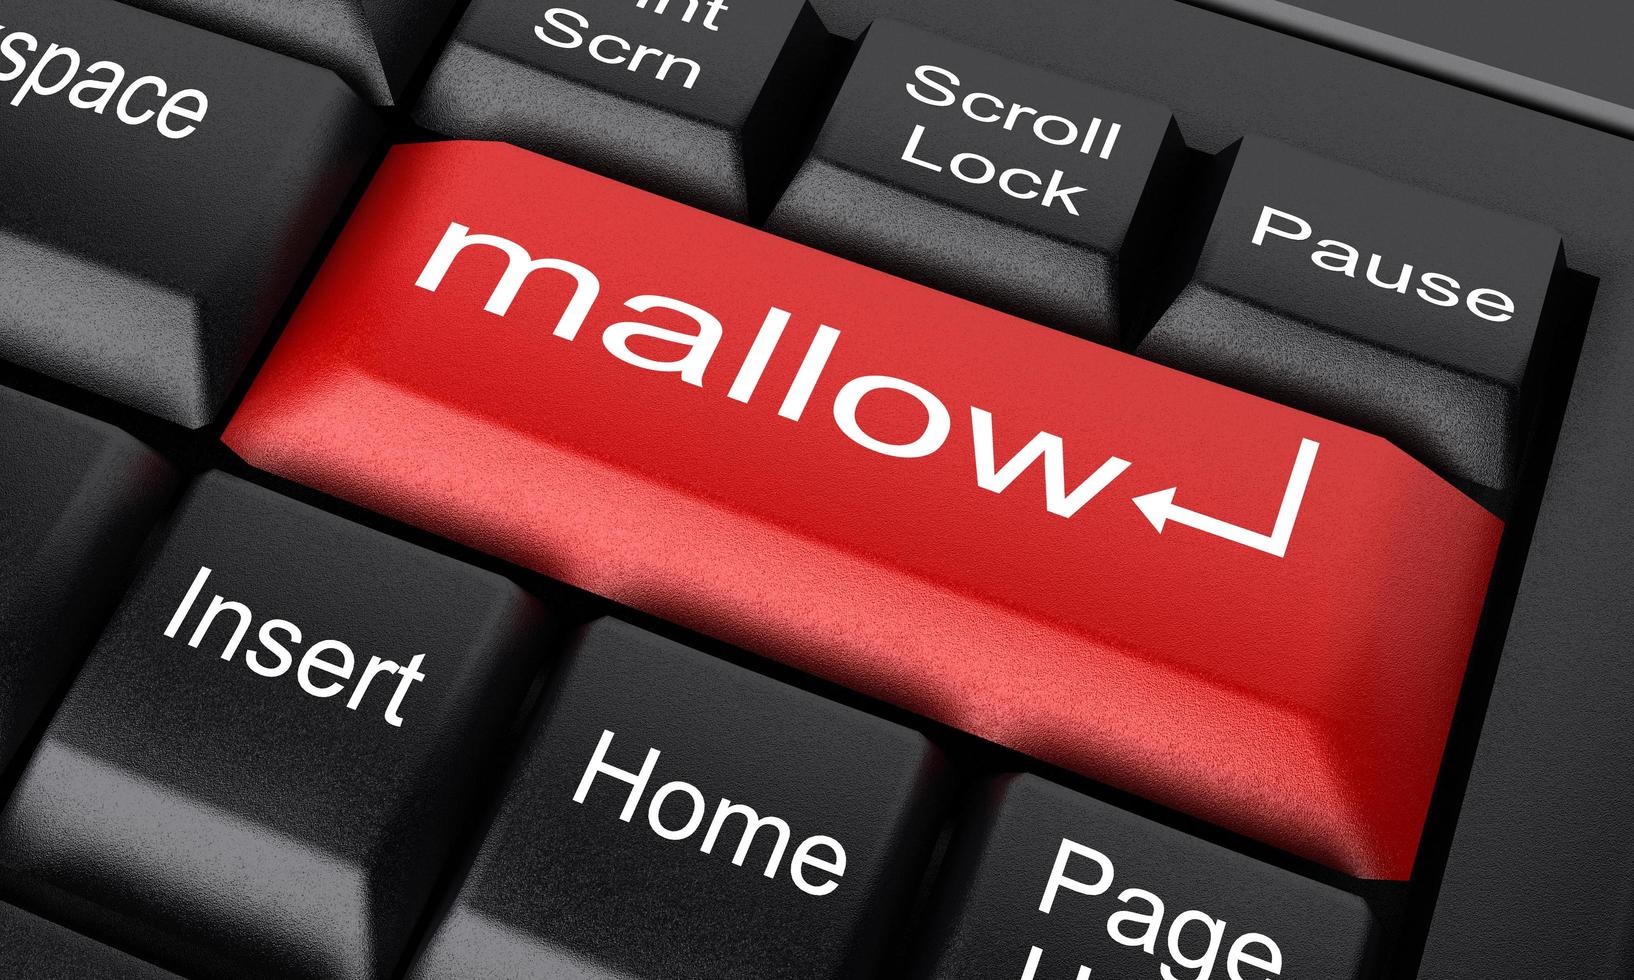 mallow word on red keyboard button photo